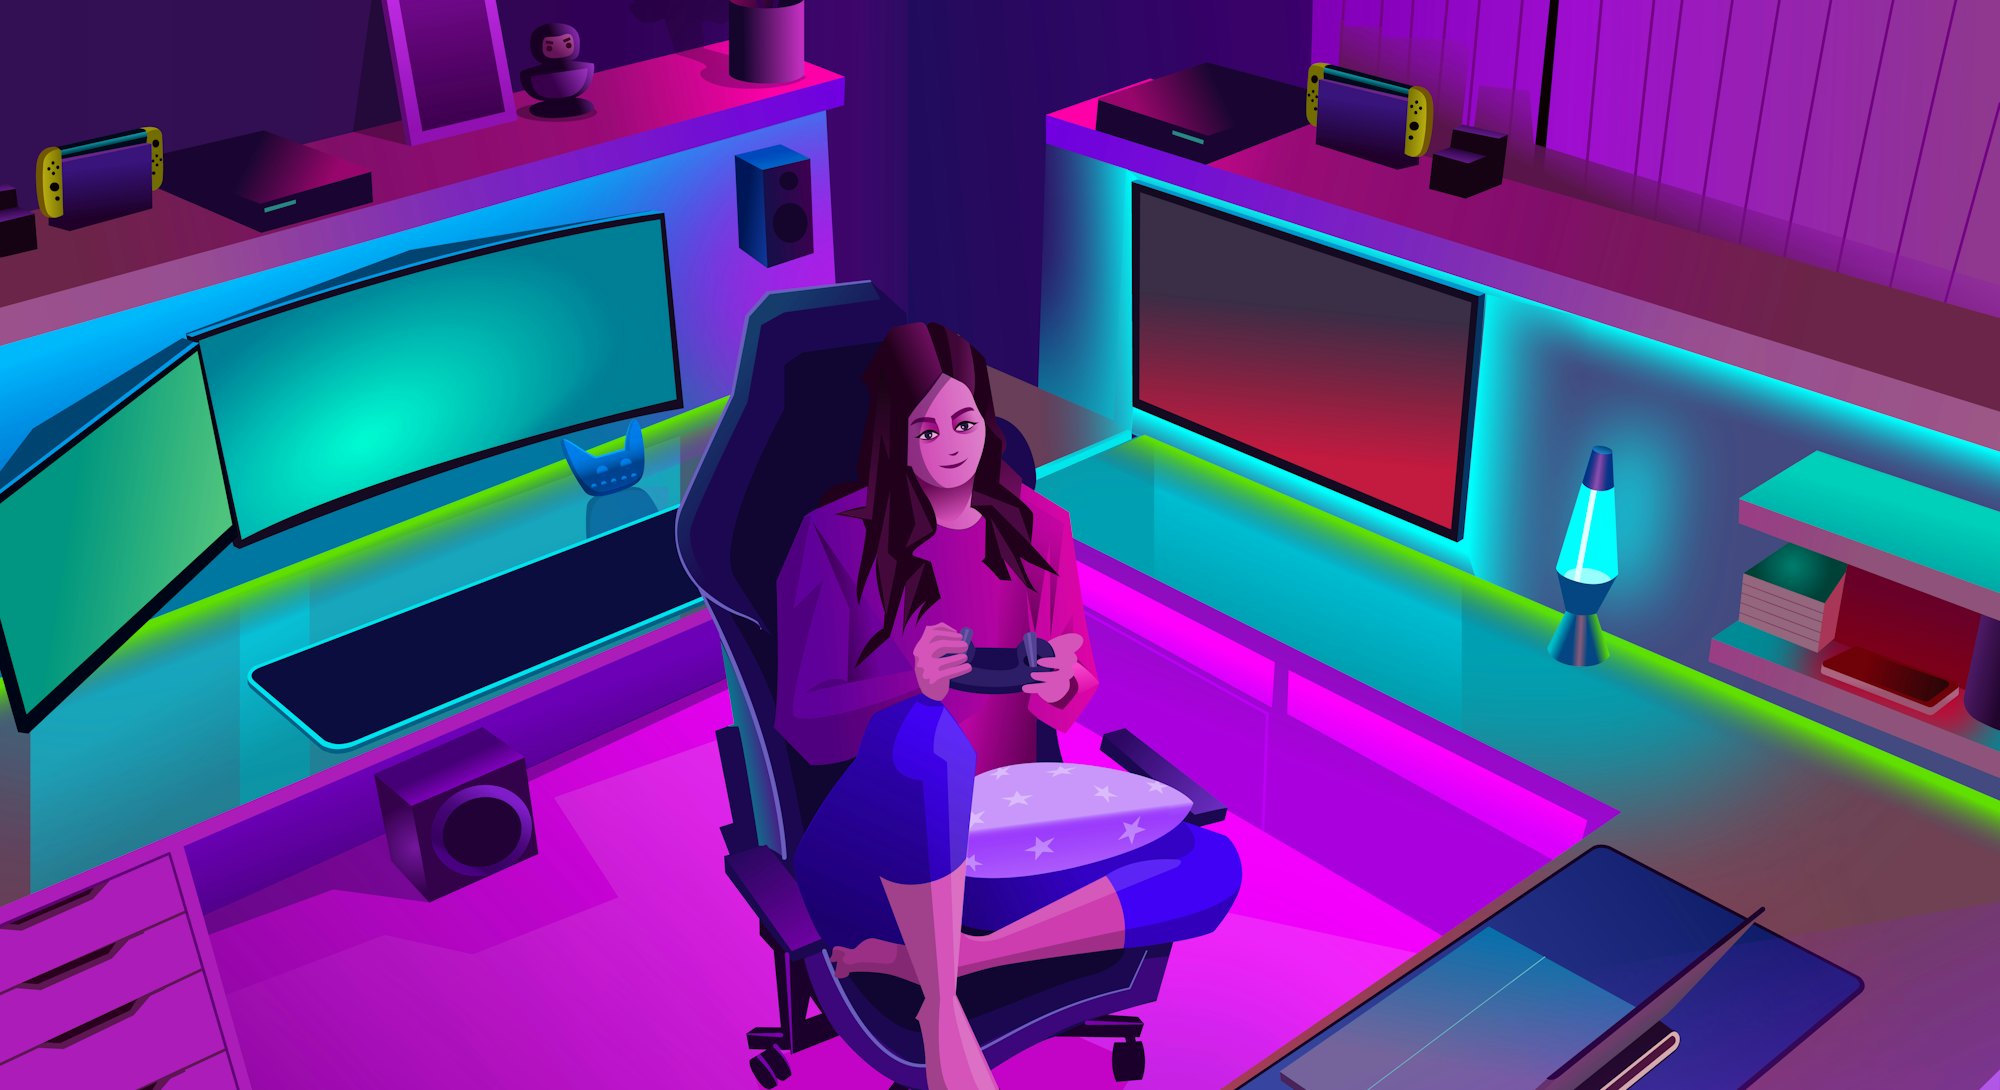 Staying at home during the pandemic playing video games. A girl sits on a gaming chair at a desk pla...